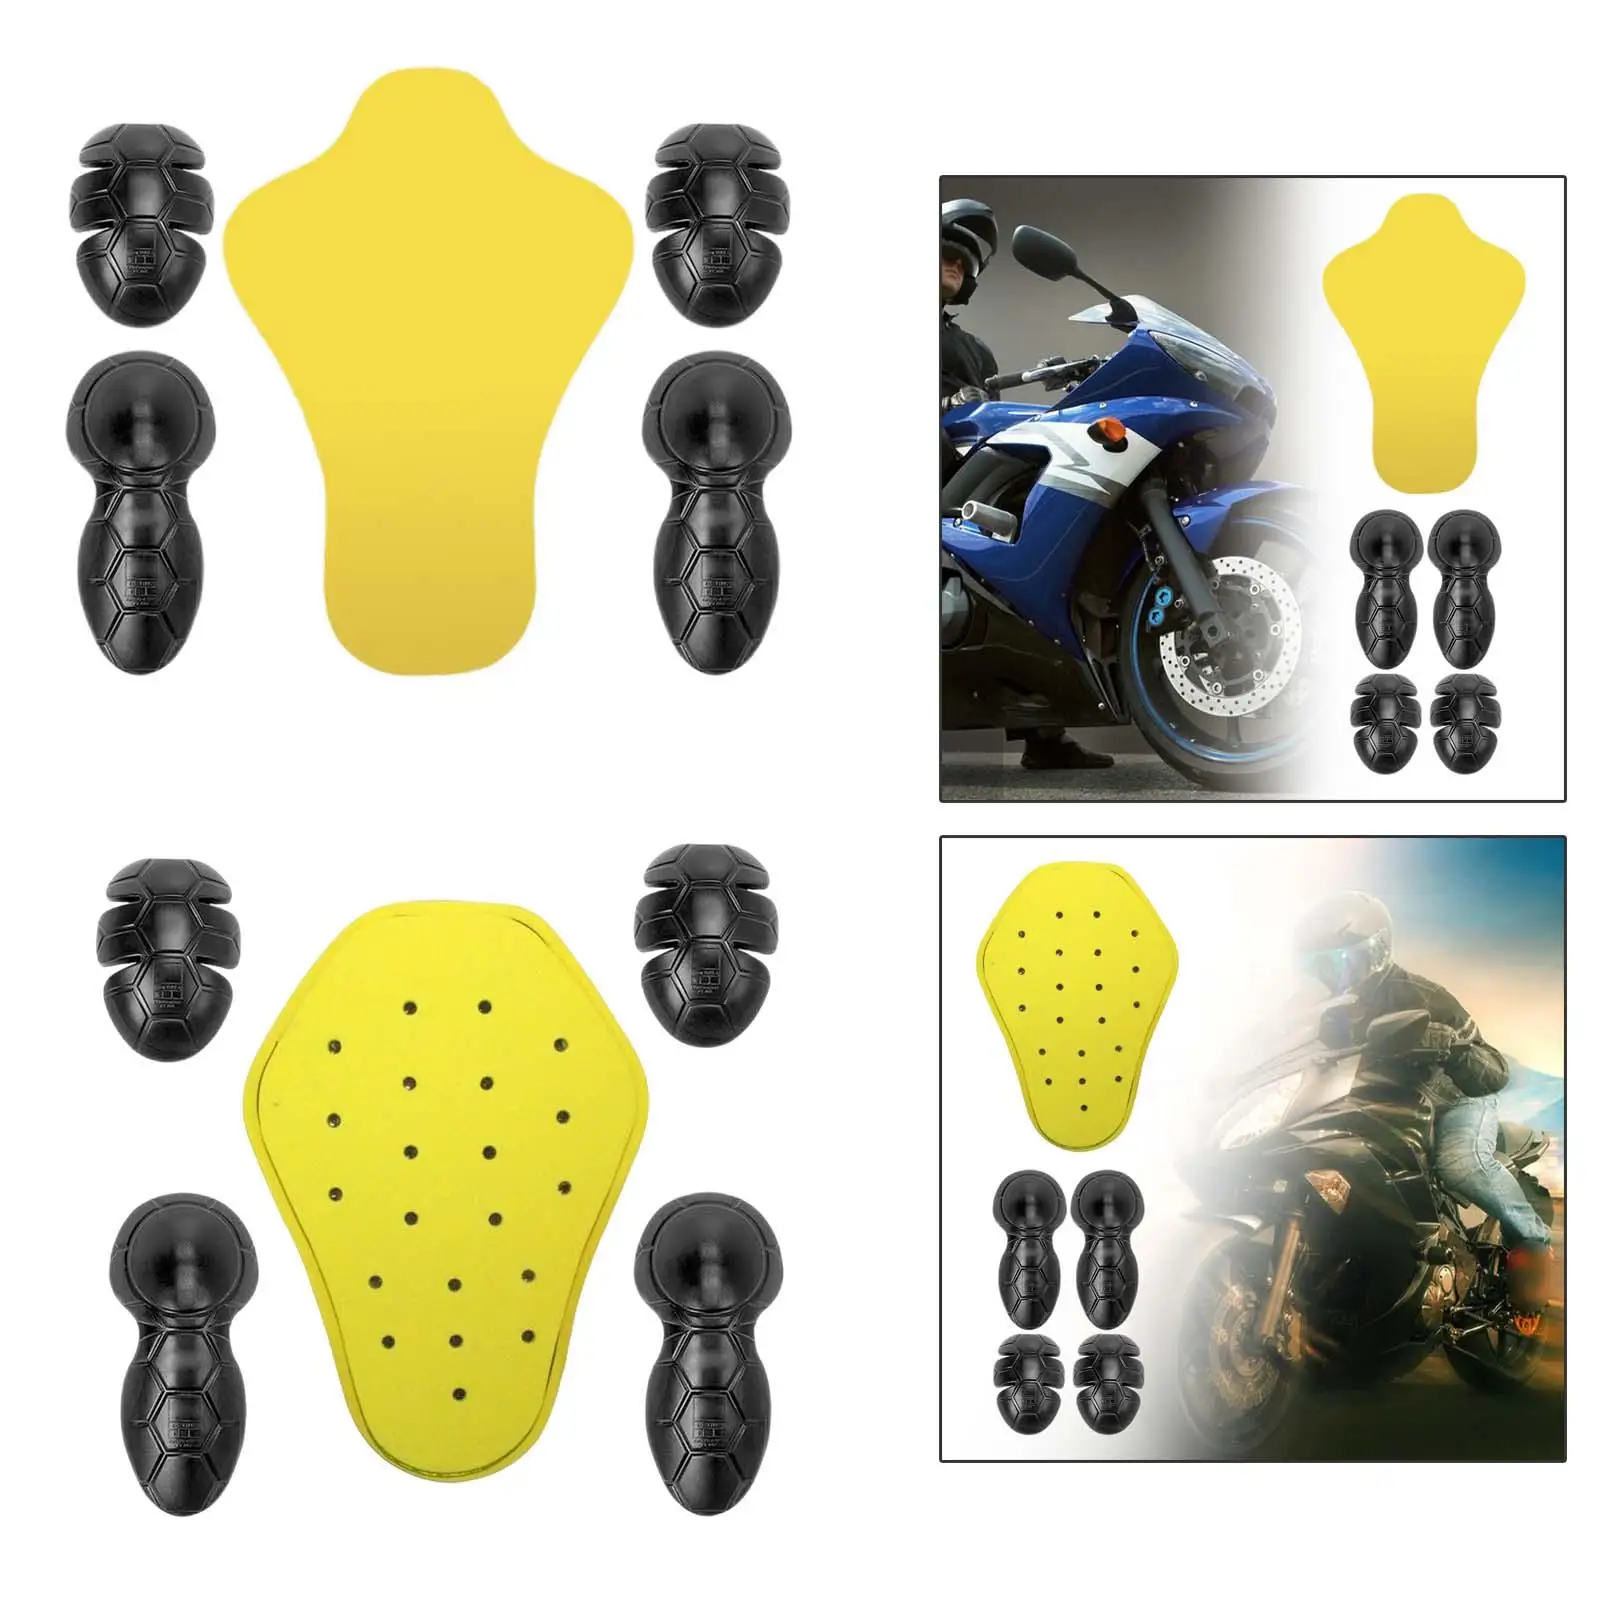 5x Motorcycle Armour Set Shoulder Knee Back Pad Breathable Jacket Inserts